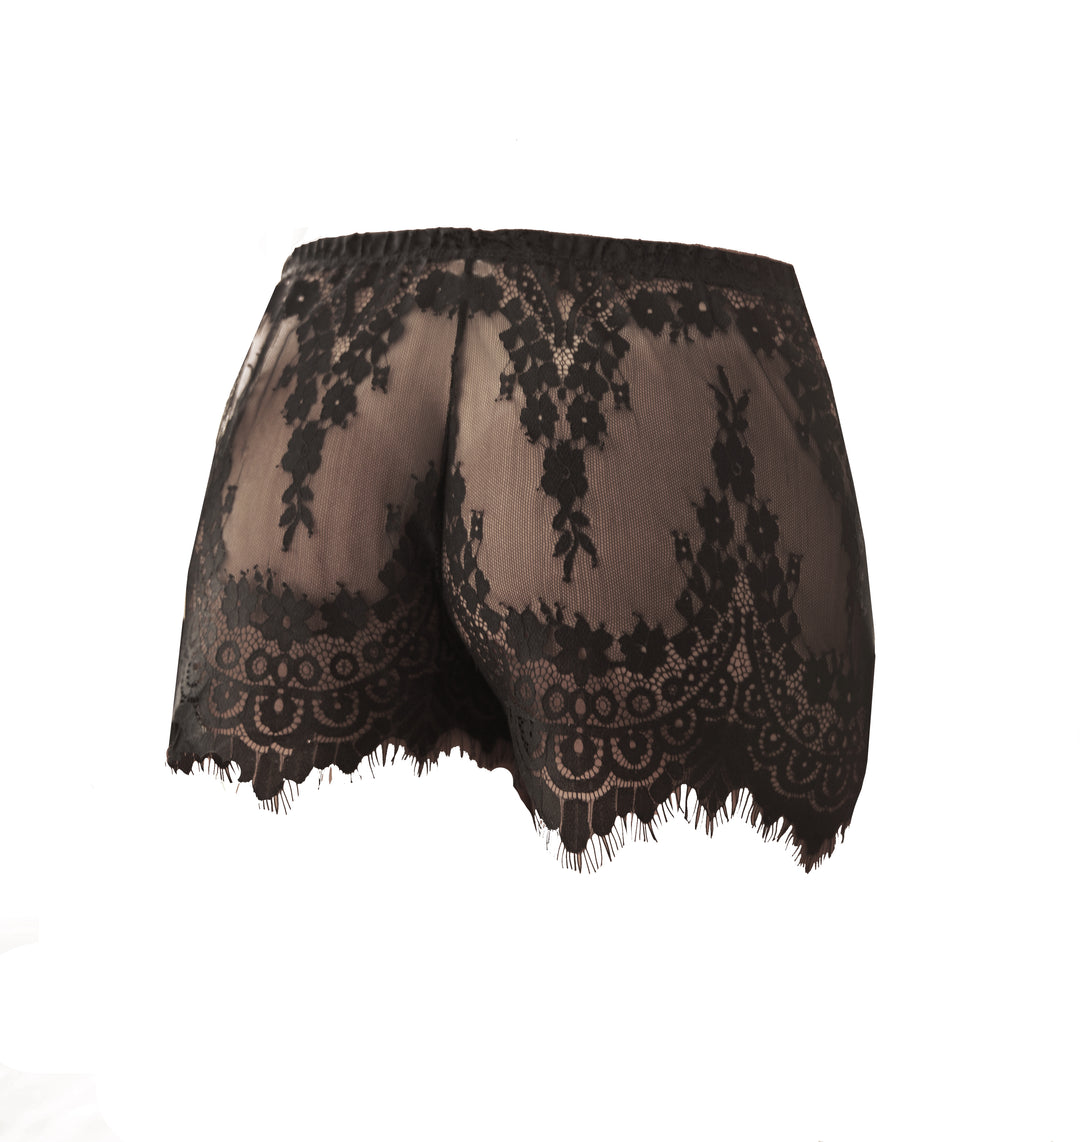 Calla Lily Floral Lace Shorts